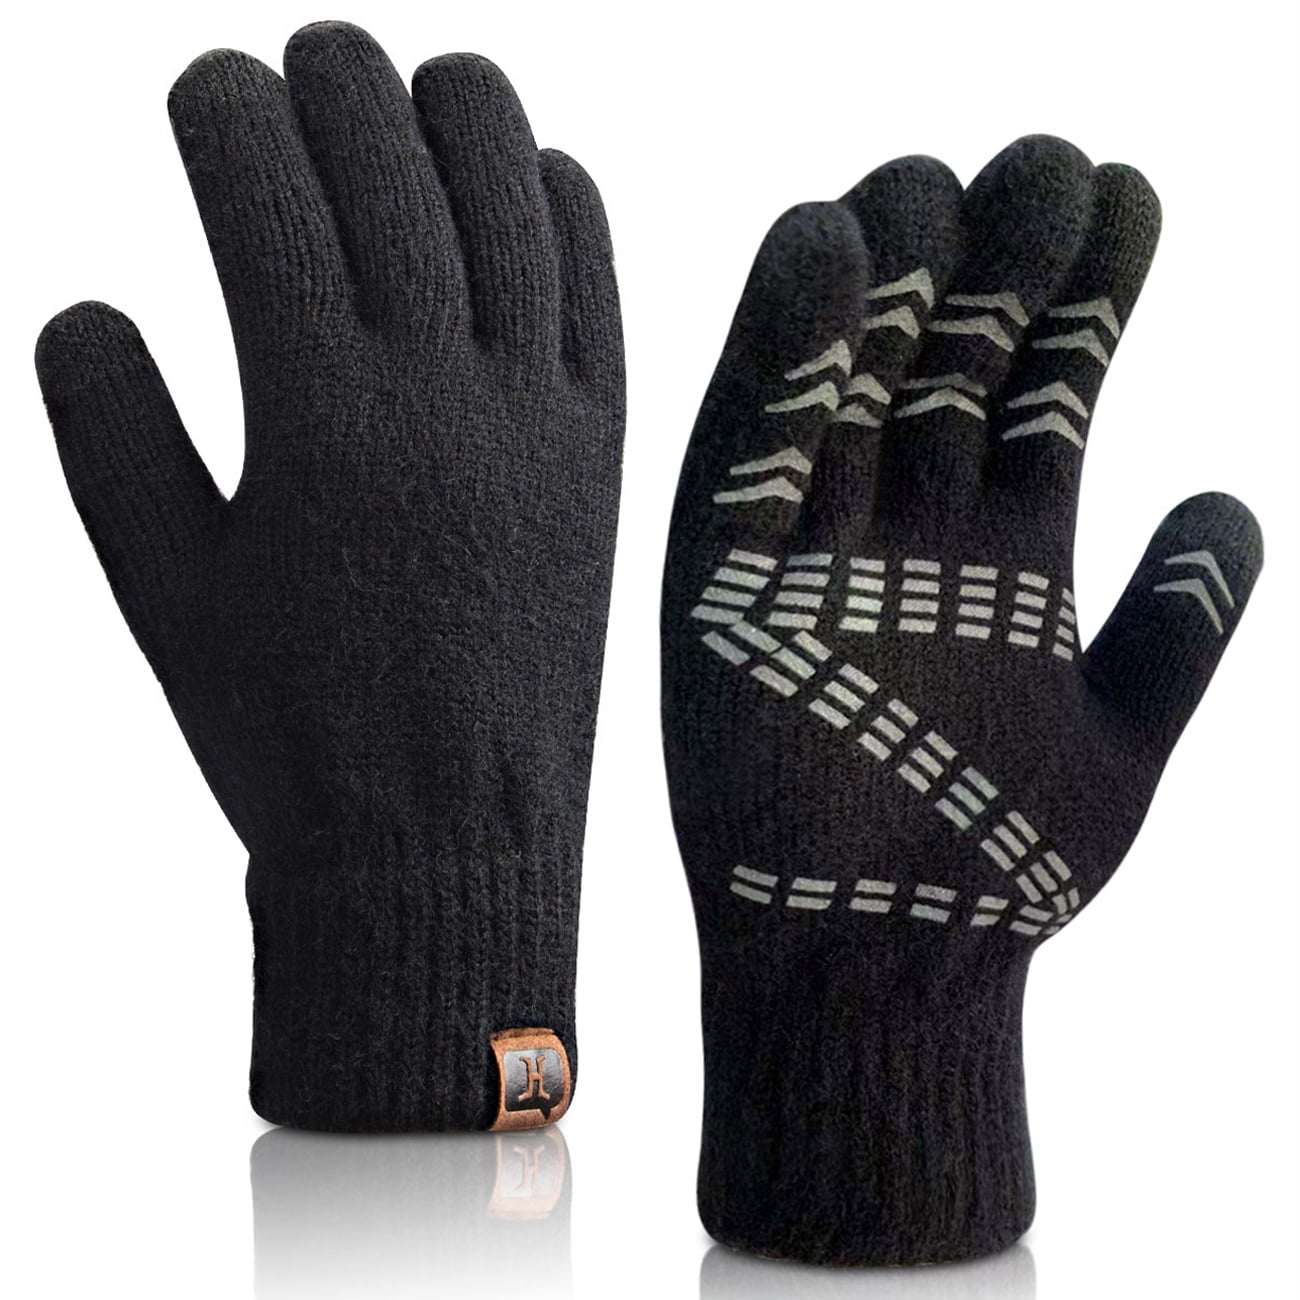 Unisex Touch Screen Warm Thermal Gloves Fingerless Knitted Long Gloves Winter UK 